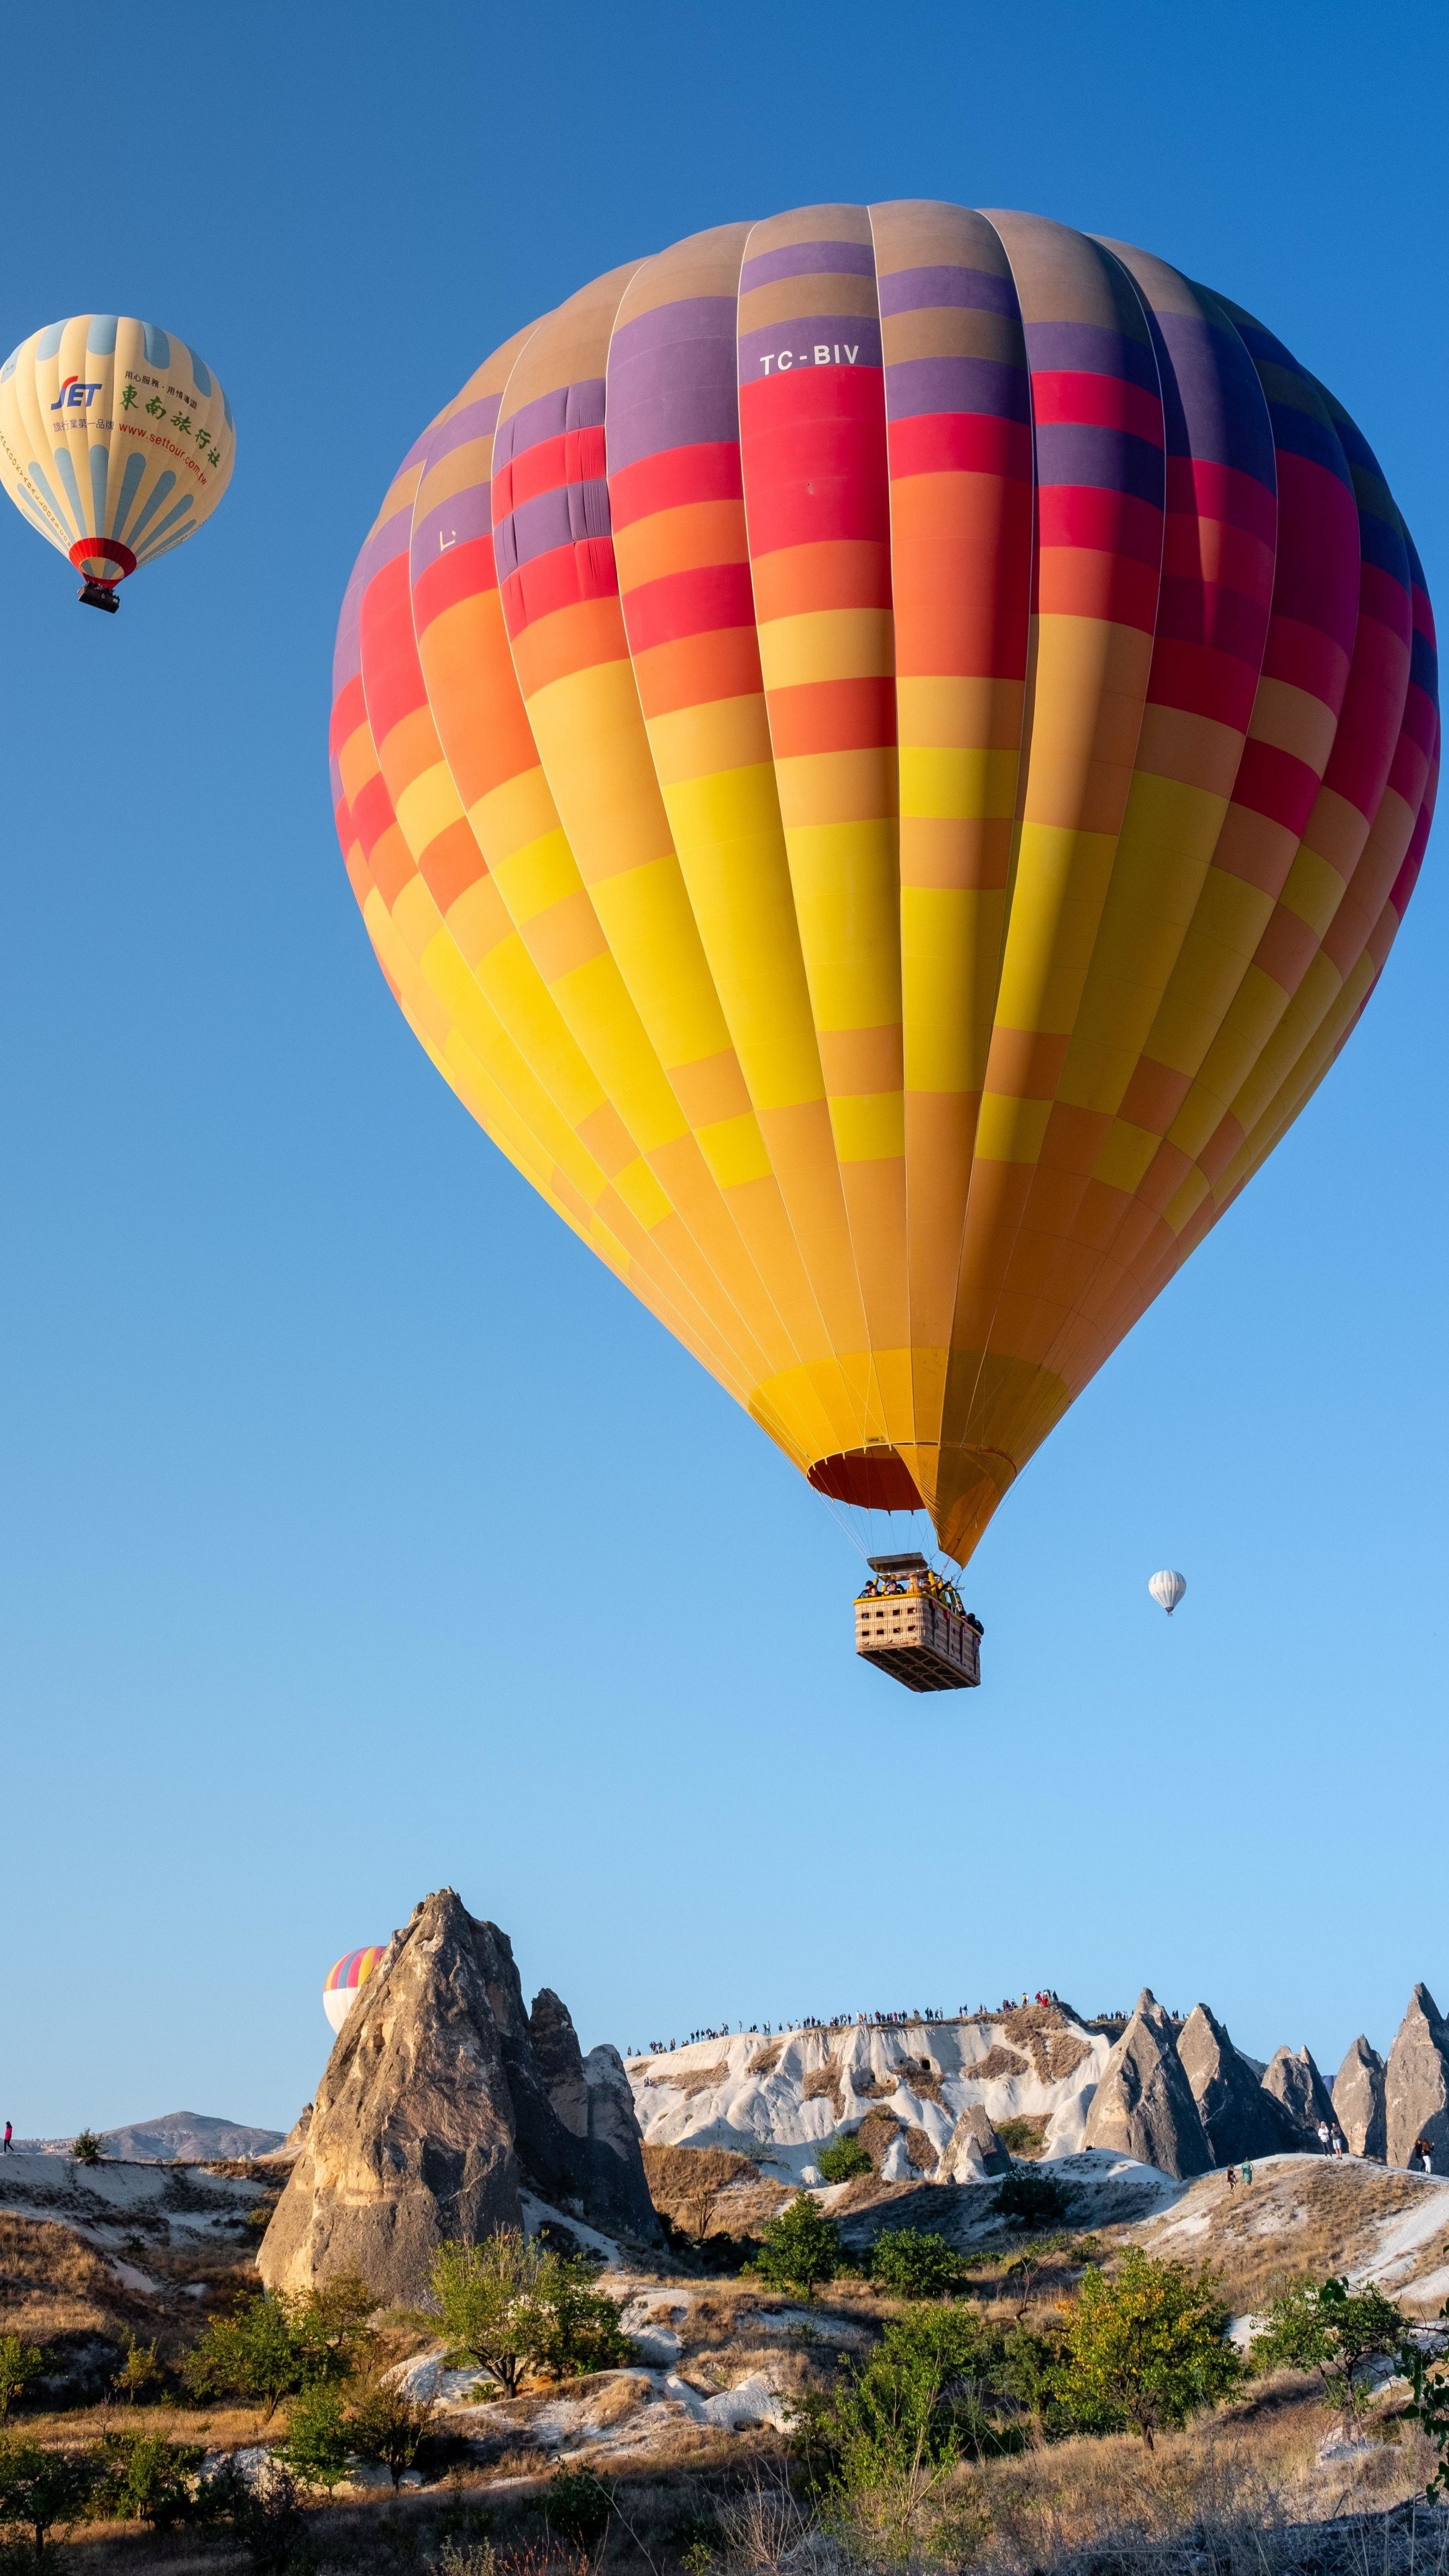 Air Sports: Hot-air balloon rides up to the sky, balloon flight over the rocks. 2160x3840 4K Wallpaper.